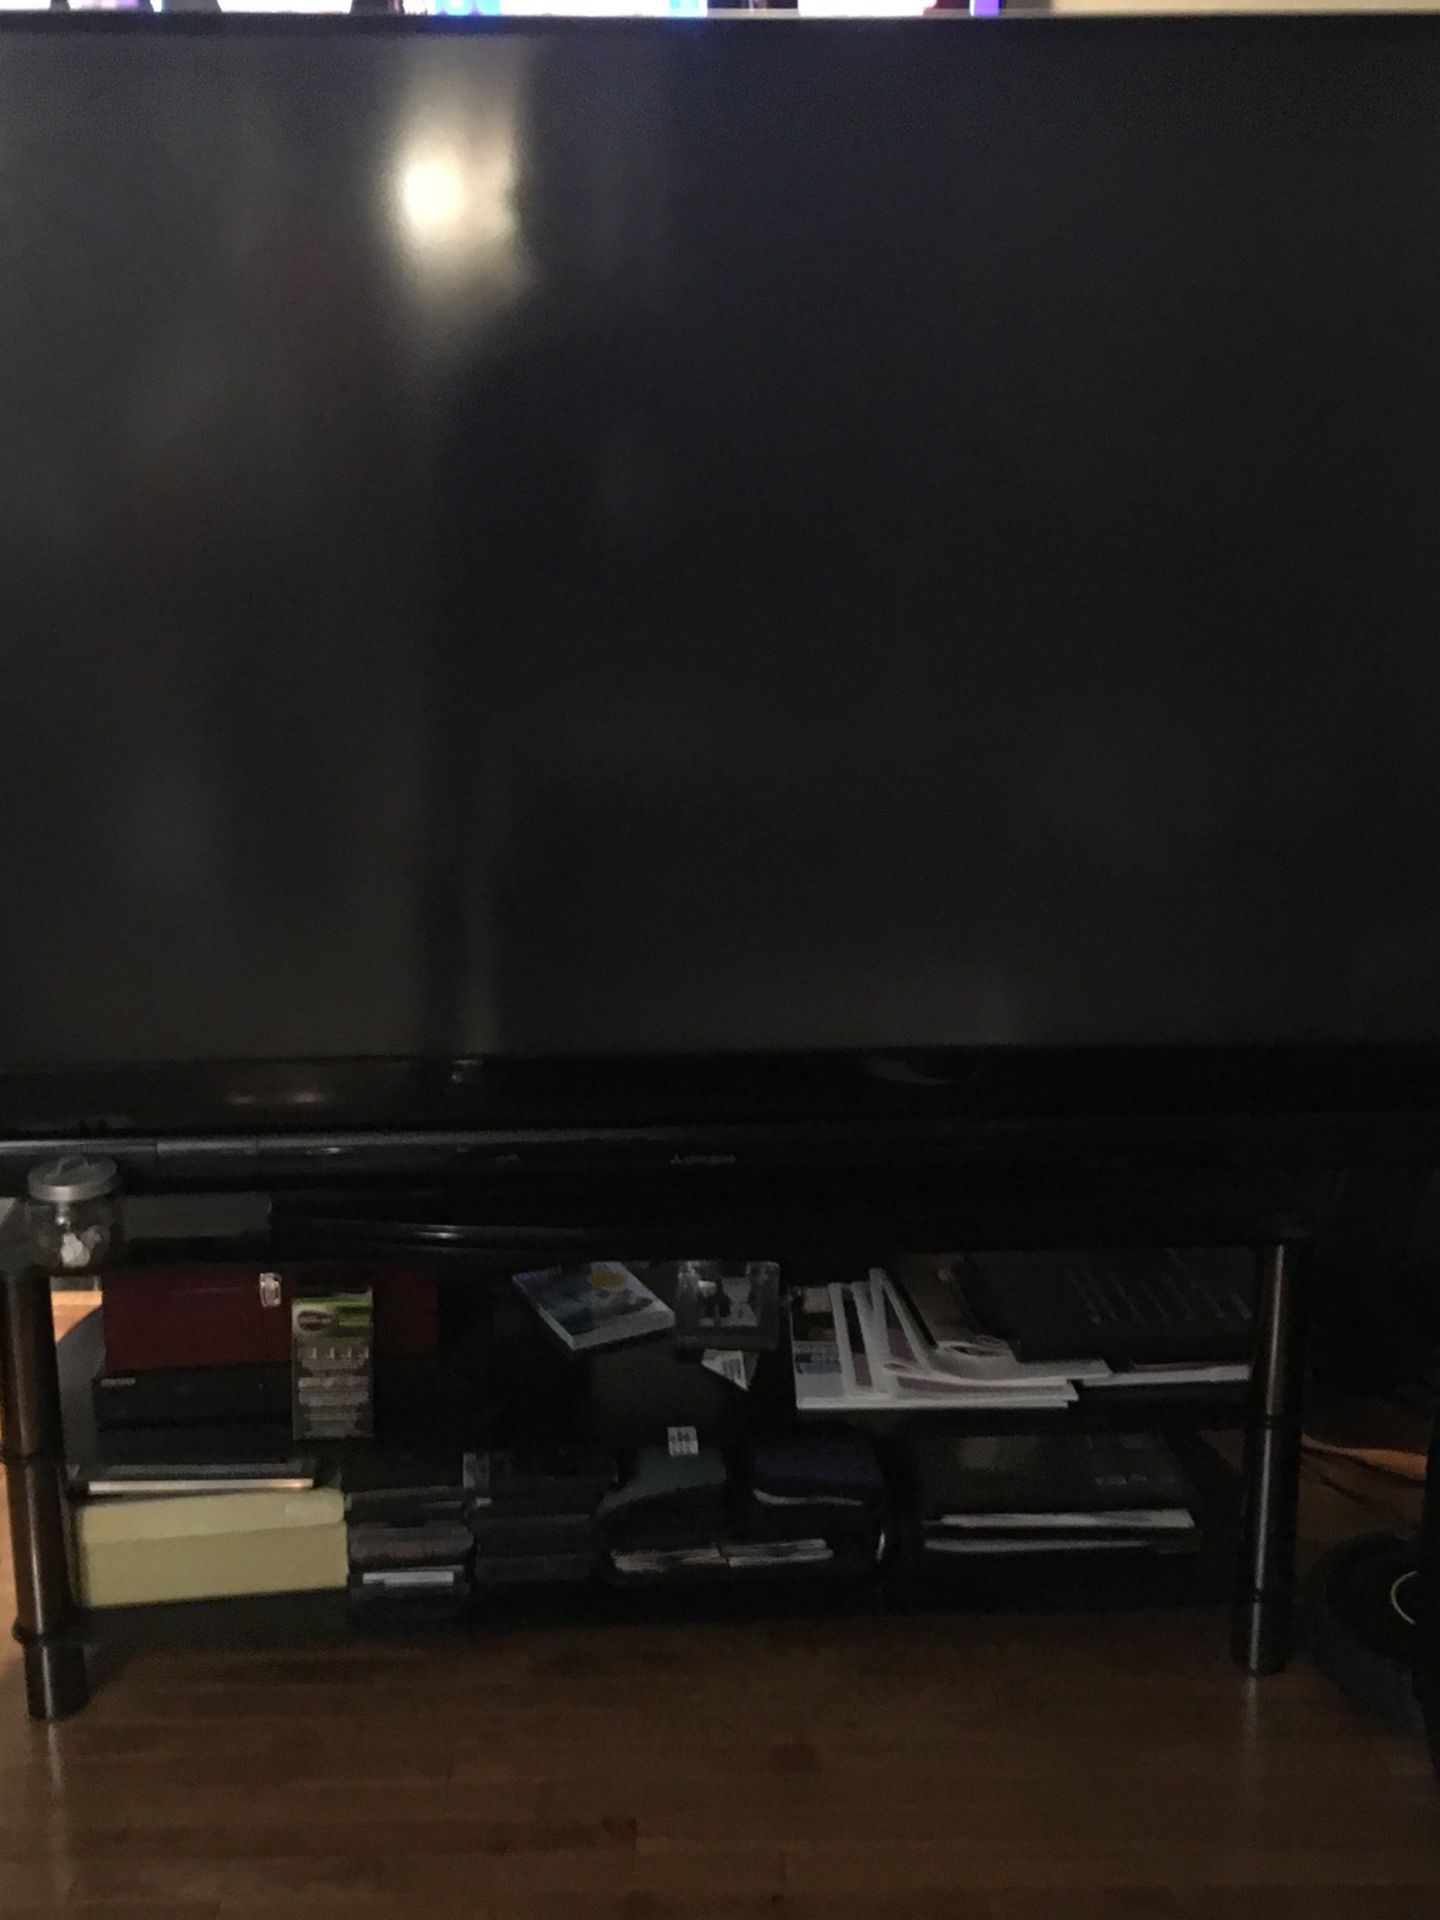 82 Inch Mitsubishi TV - About 10 Years Old